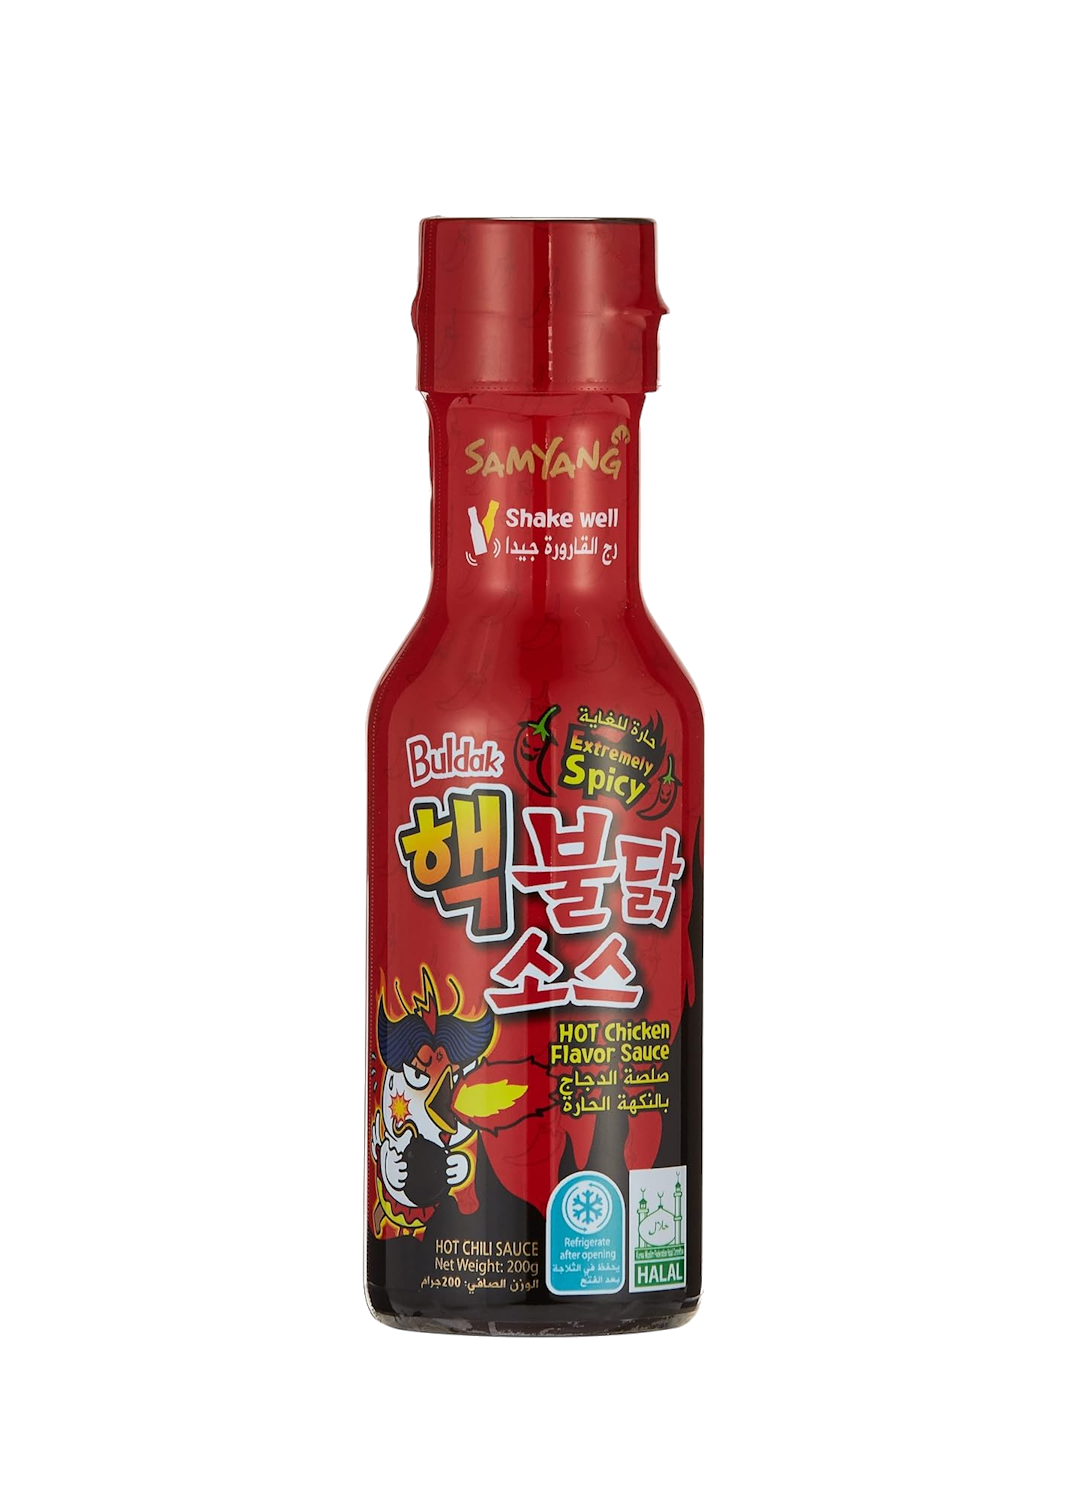 Samyang Buldak Hot Chicken Flavour Sauce 200g (Extremely Spicy)